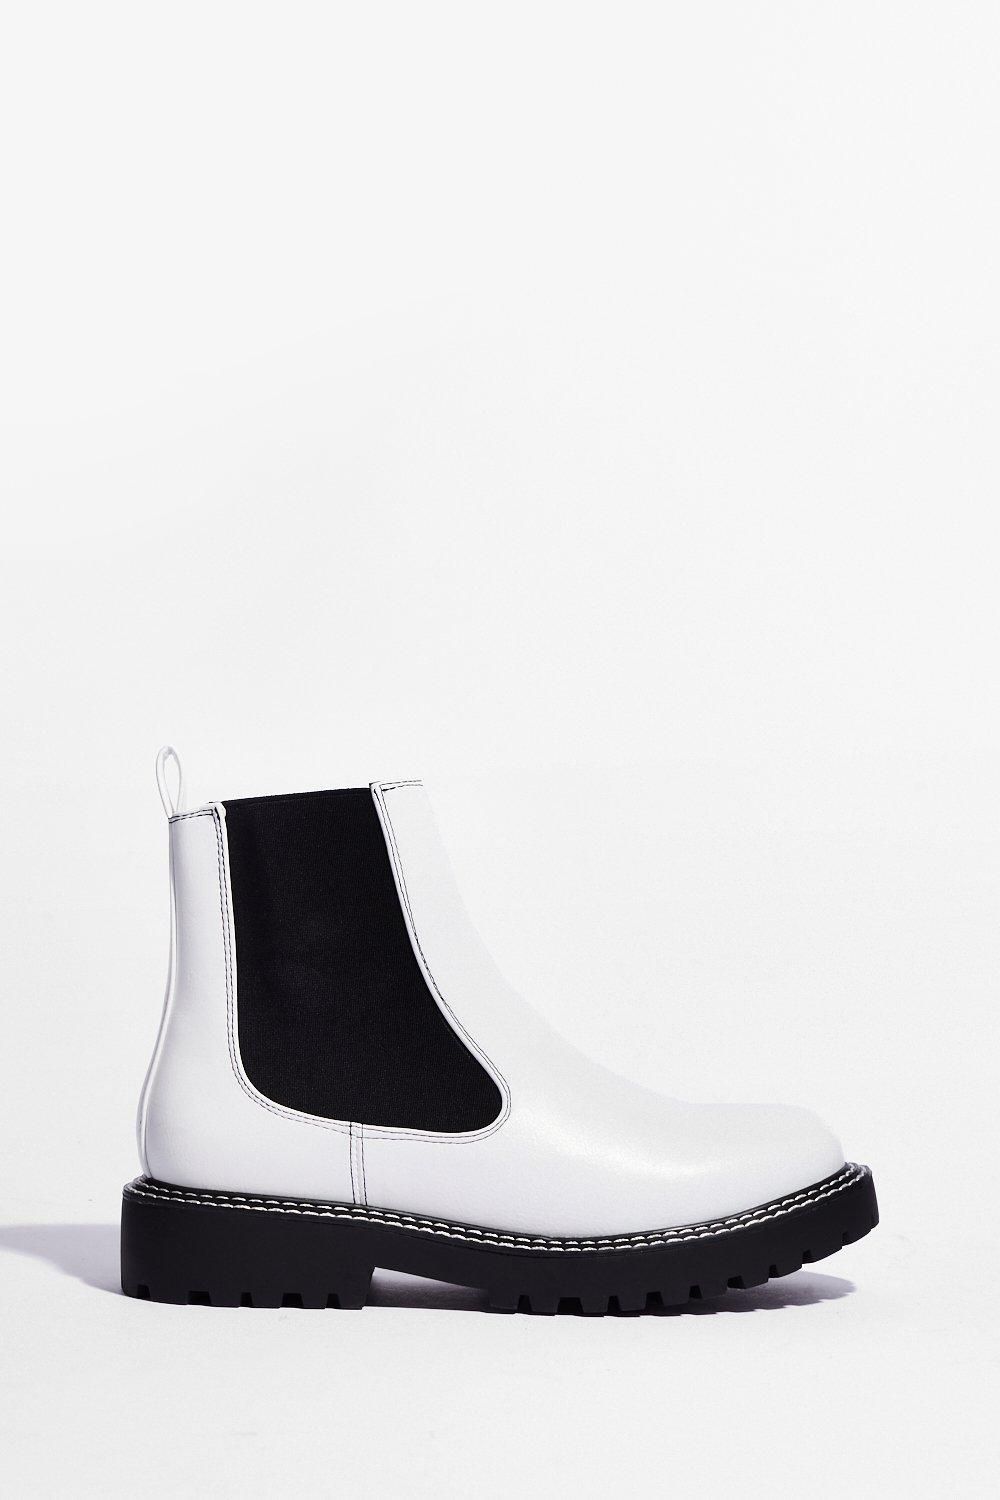 Stitch Faux Leather Chelsea Boots | Nasty Gal (US)